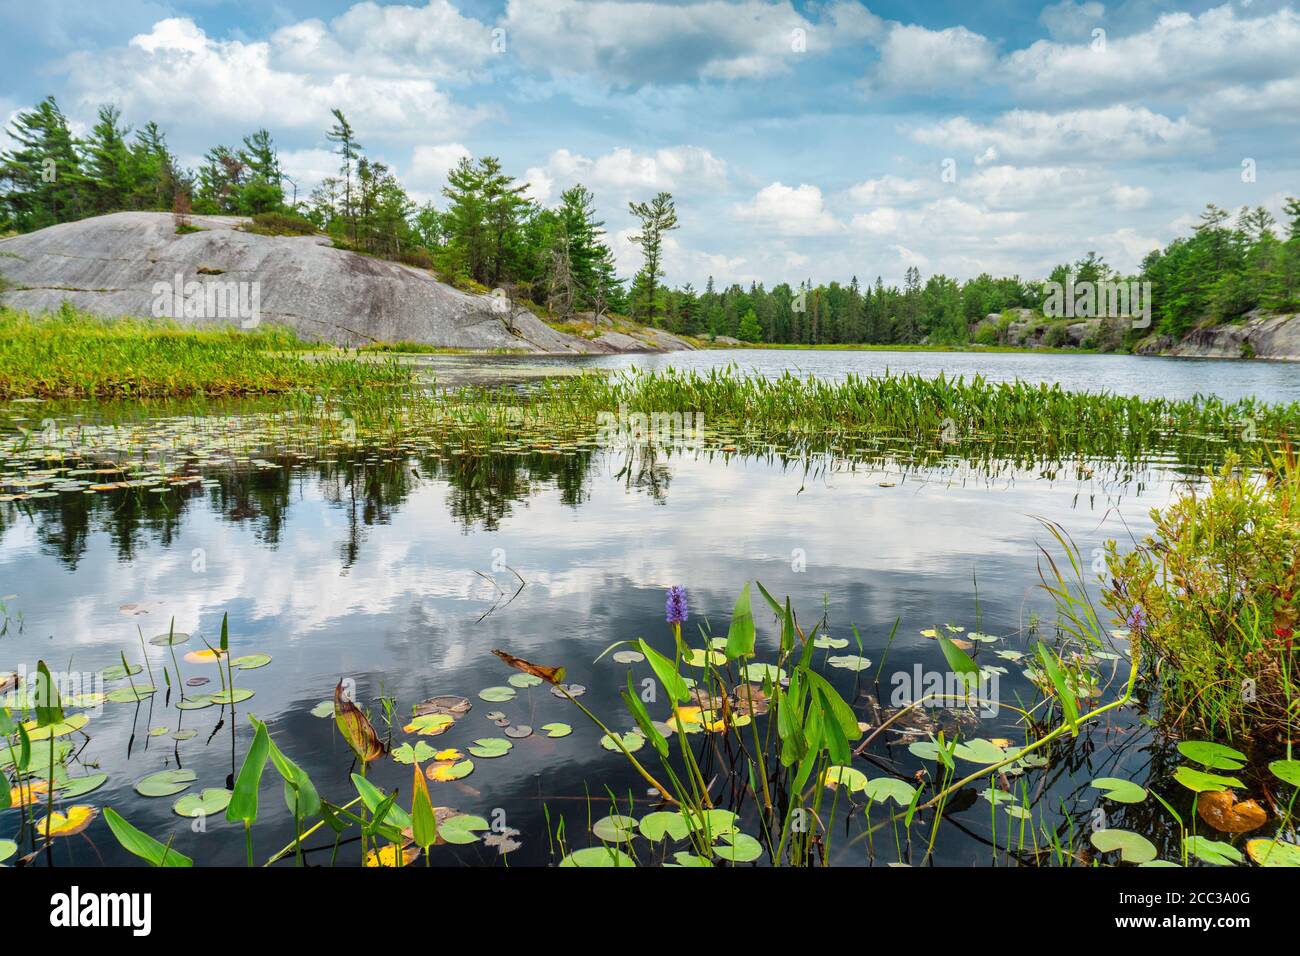 Grundy Lake Provincial Park wetlands and rock formations under dramatic summer sky Stock Photo